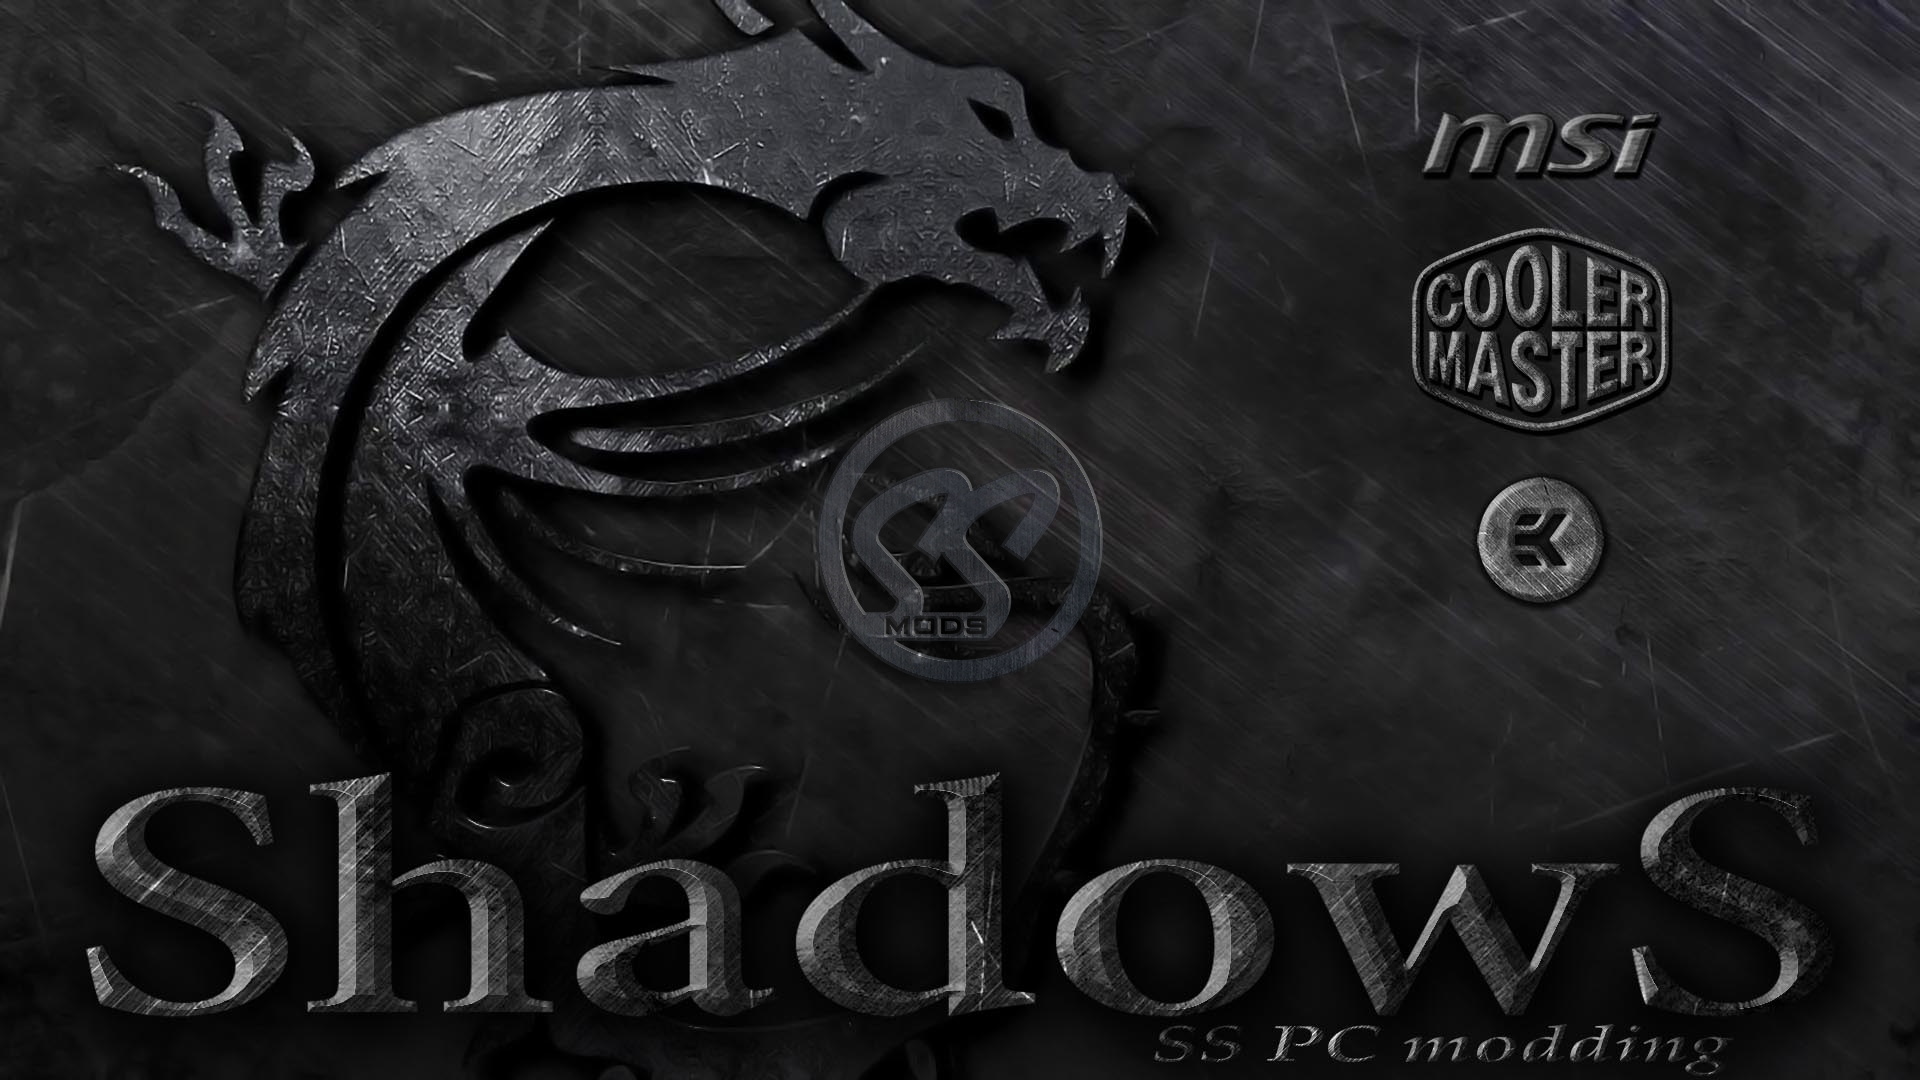 ShadowS-project-by-SS-001